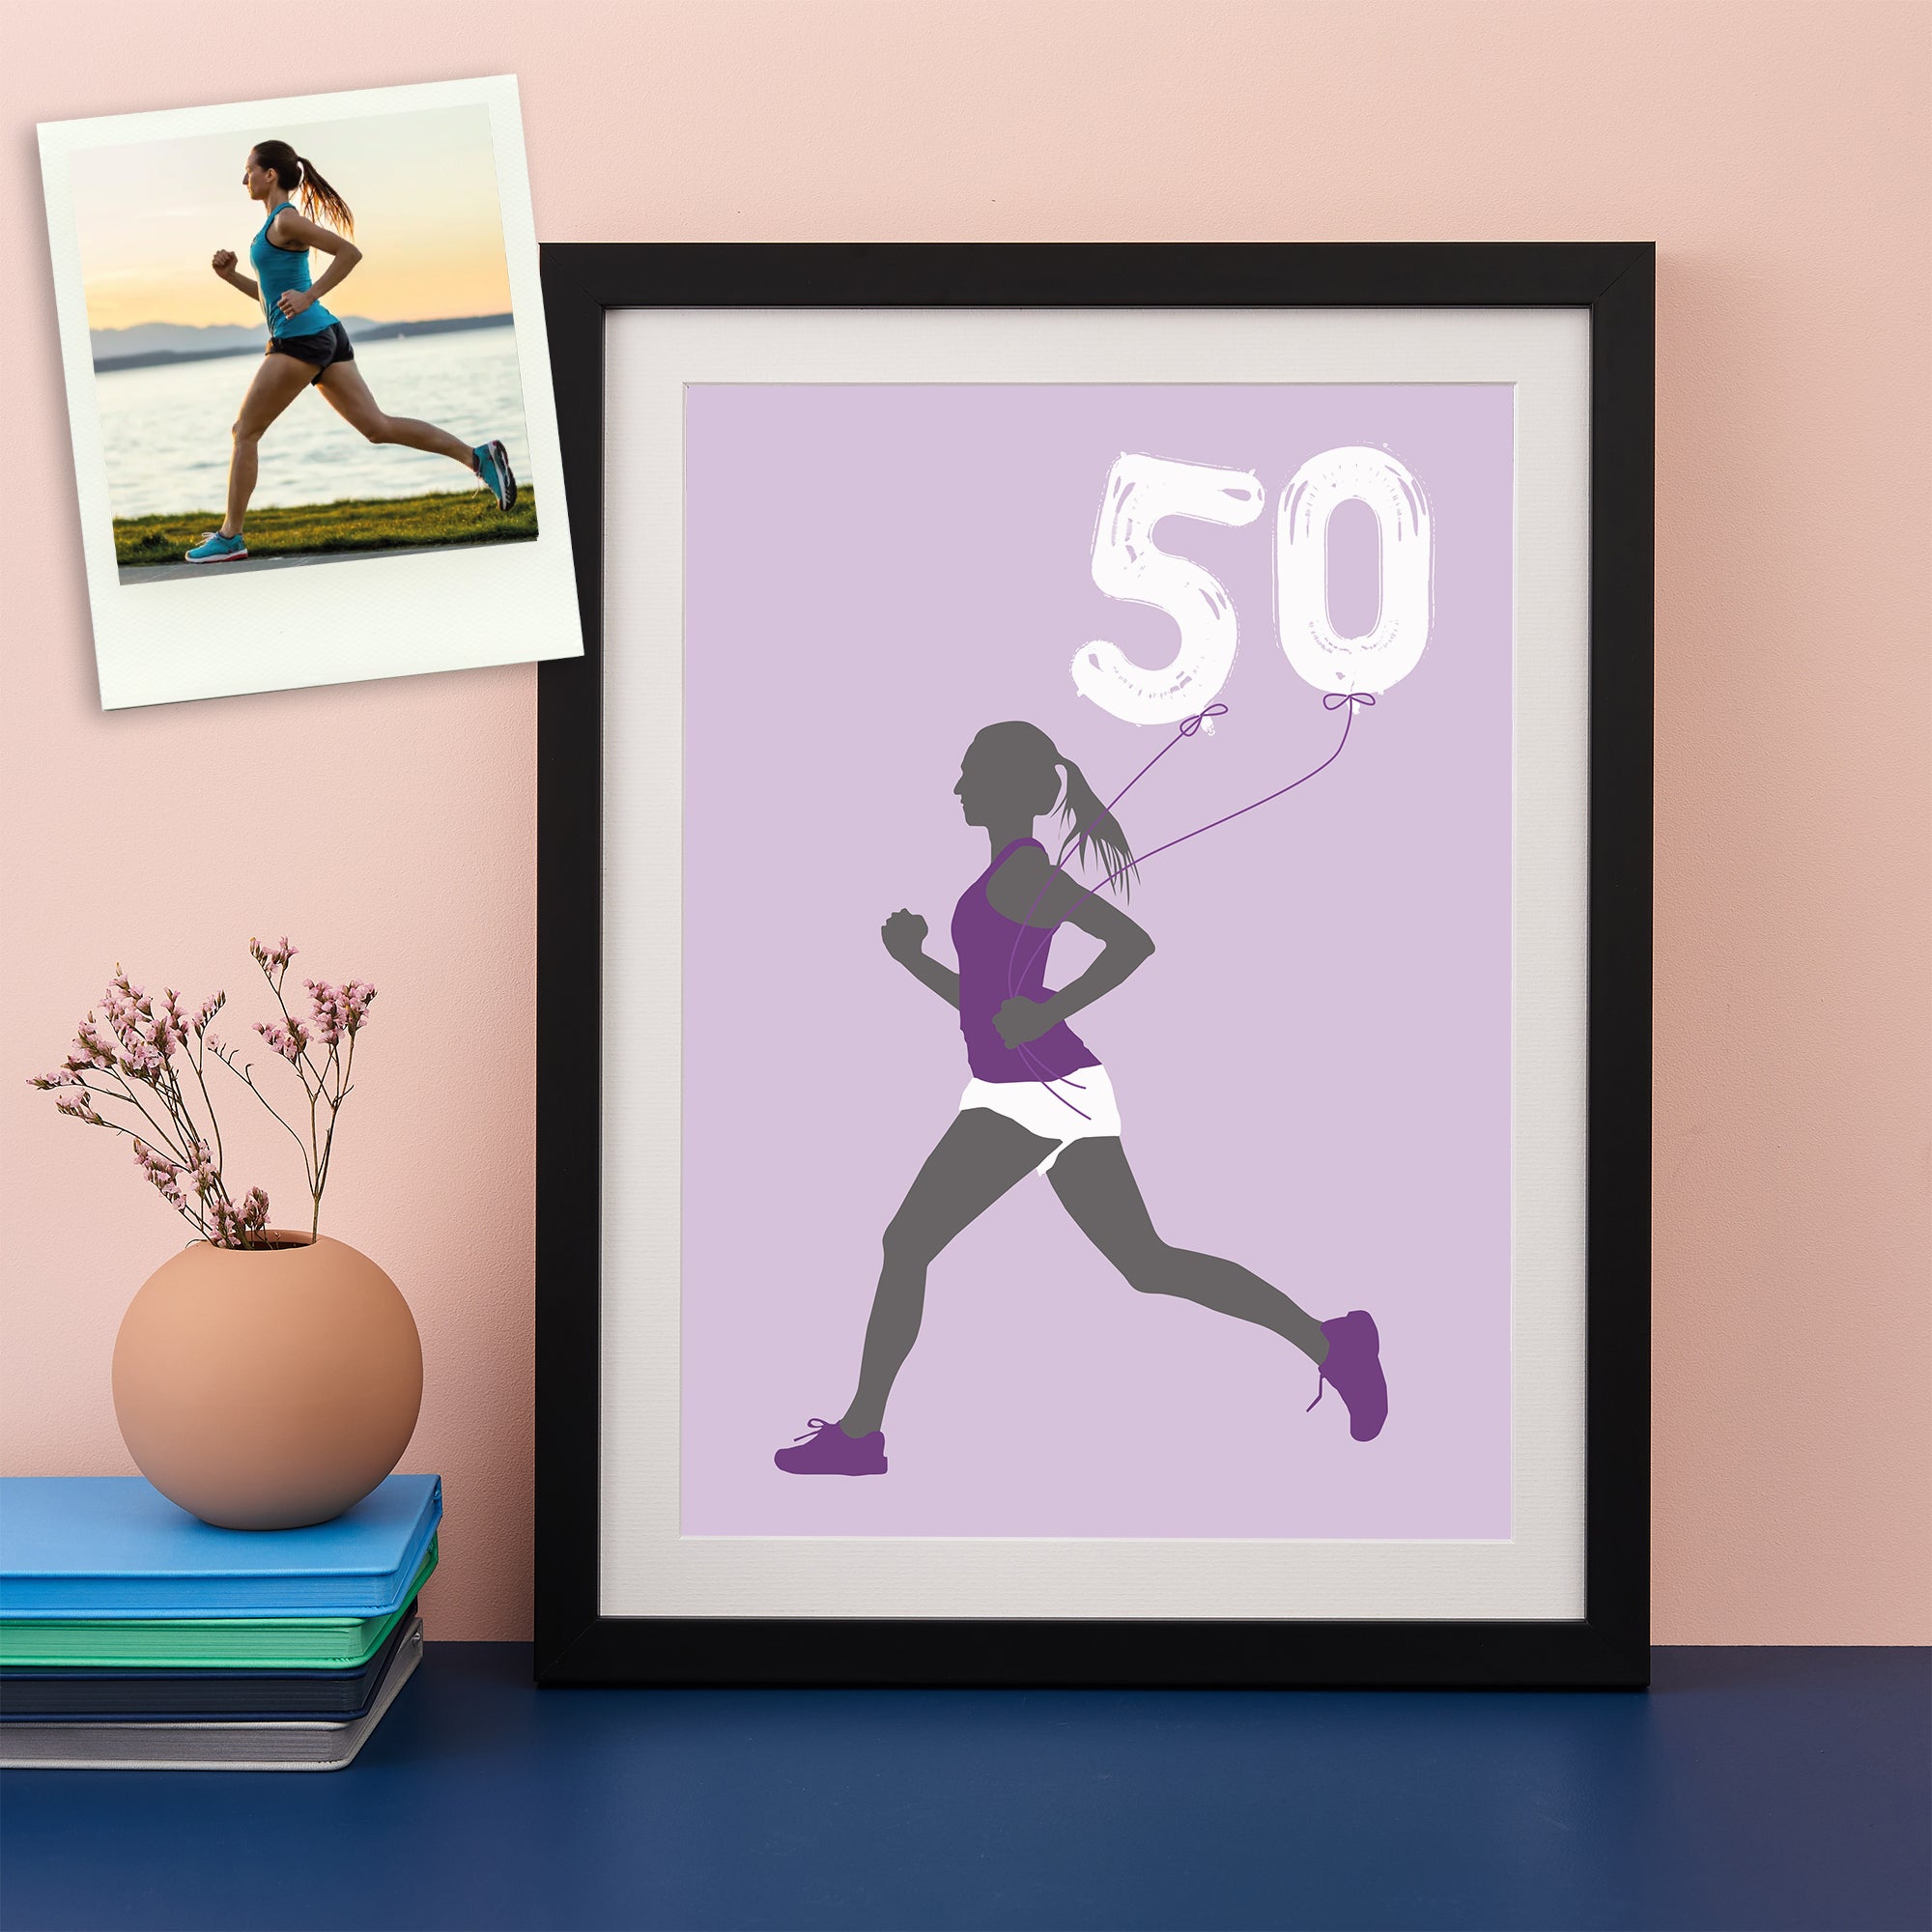 Colour pop modern silhouette image of a woman running holding balloons saying 50